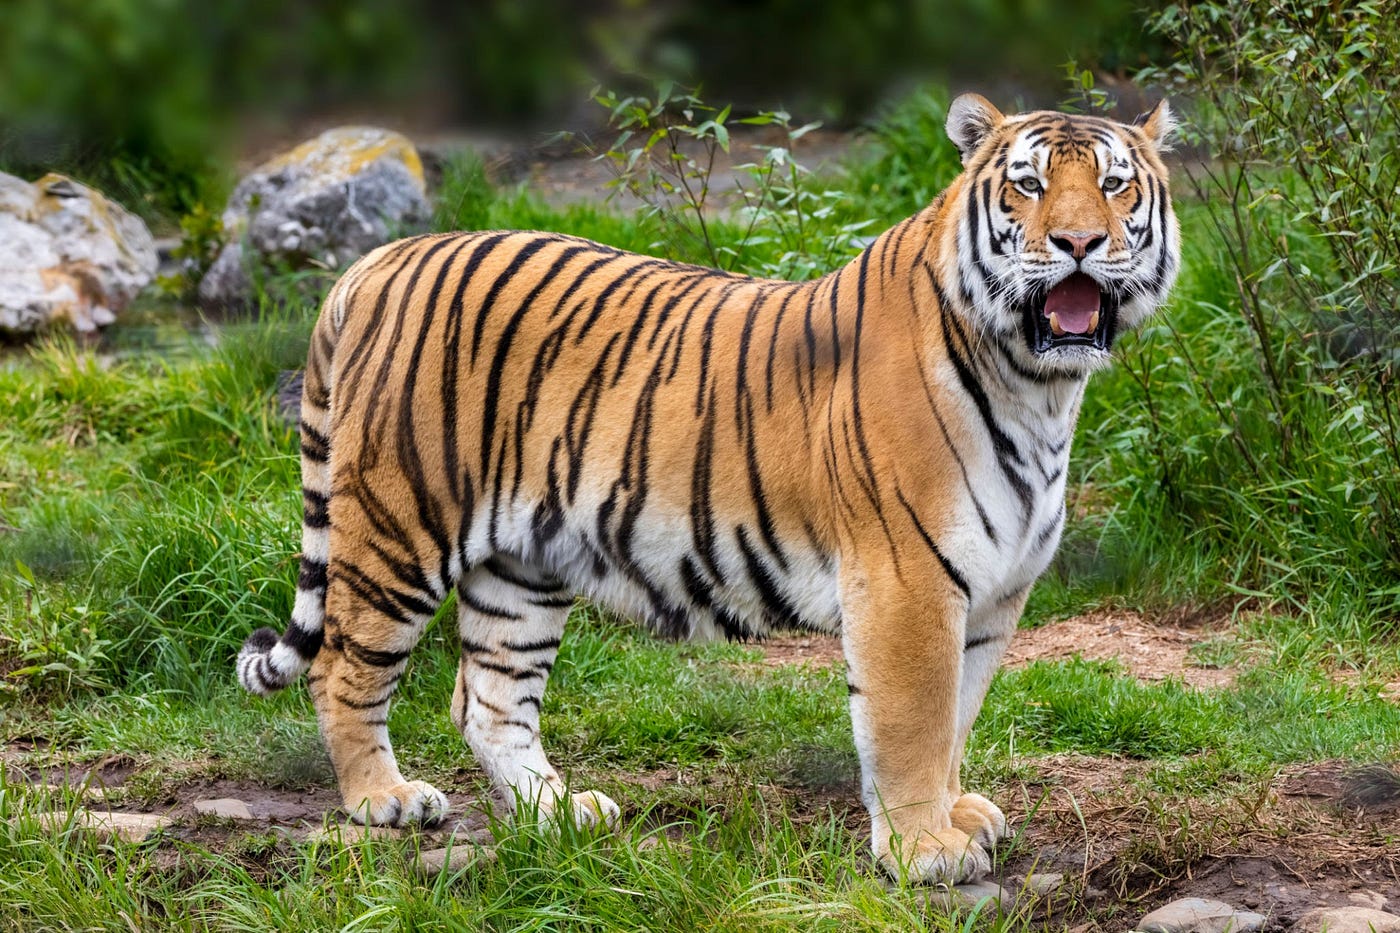 ROYAL BENGAL TIGER. The Royal Bengal Tiger, also known as…